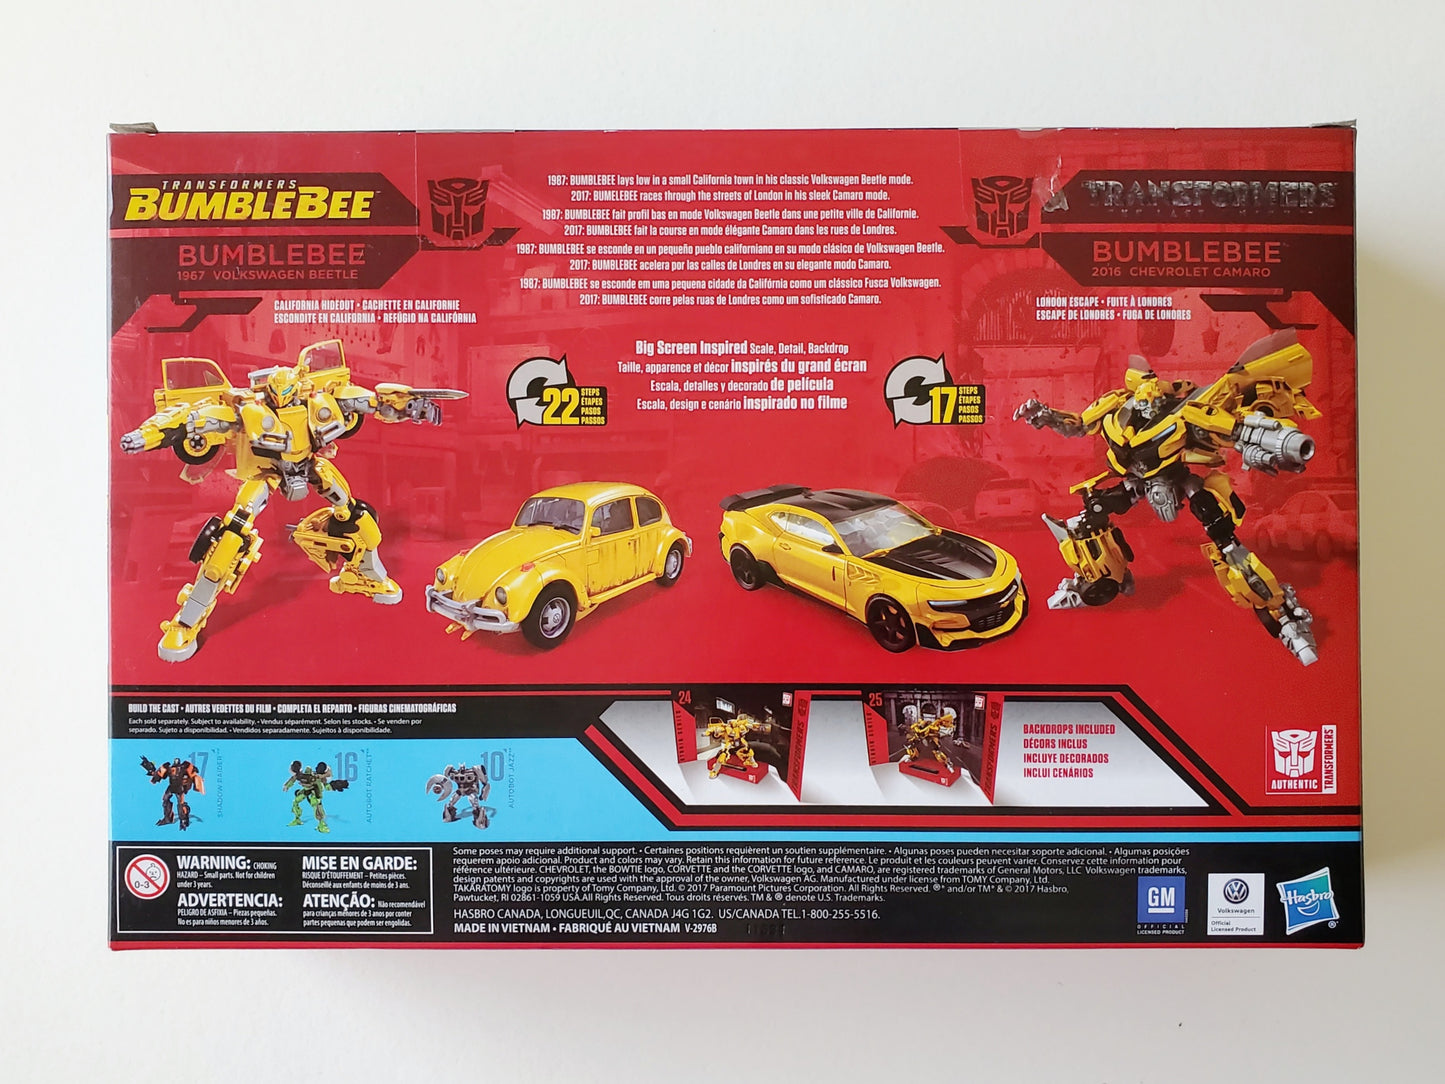 Transformers Studio Series Bumblebee (Bumblebee Movie and The Last Knight) Deluxe Class 4.5-Inch Figure 2-Pack